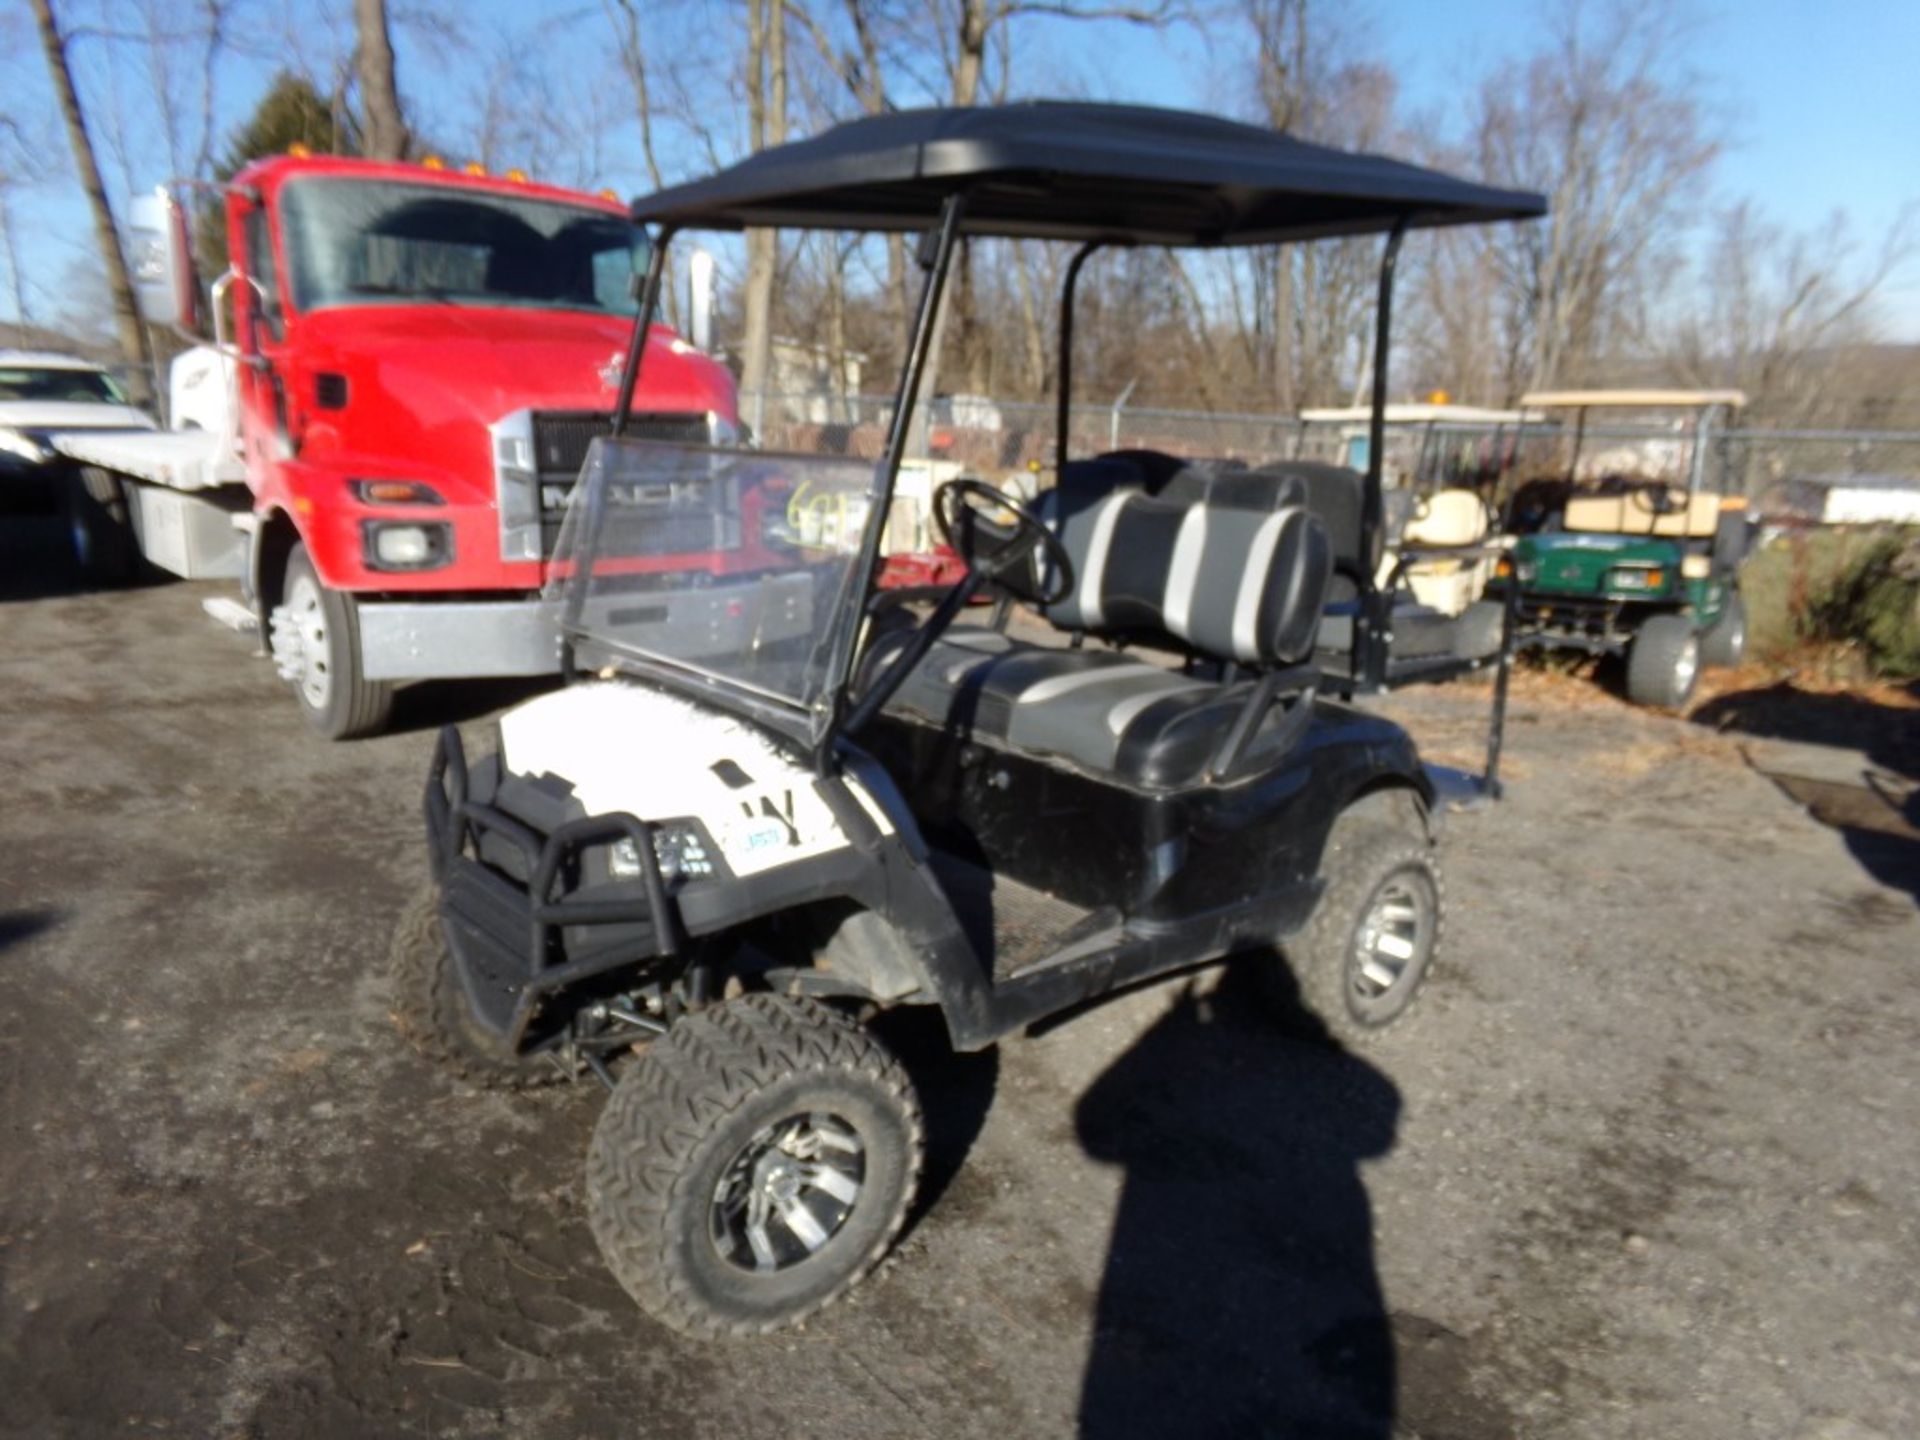 Black Lifted Yamaha Gas Golf Cart with Canopy, Windshield, Steel Utility Box, Cart # L137 - Image 3 of 3